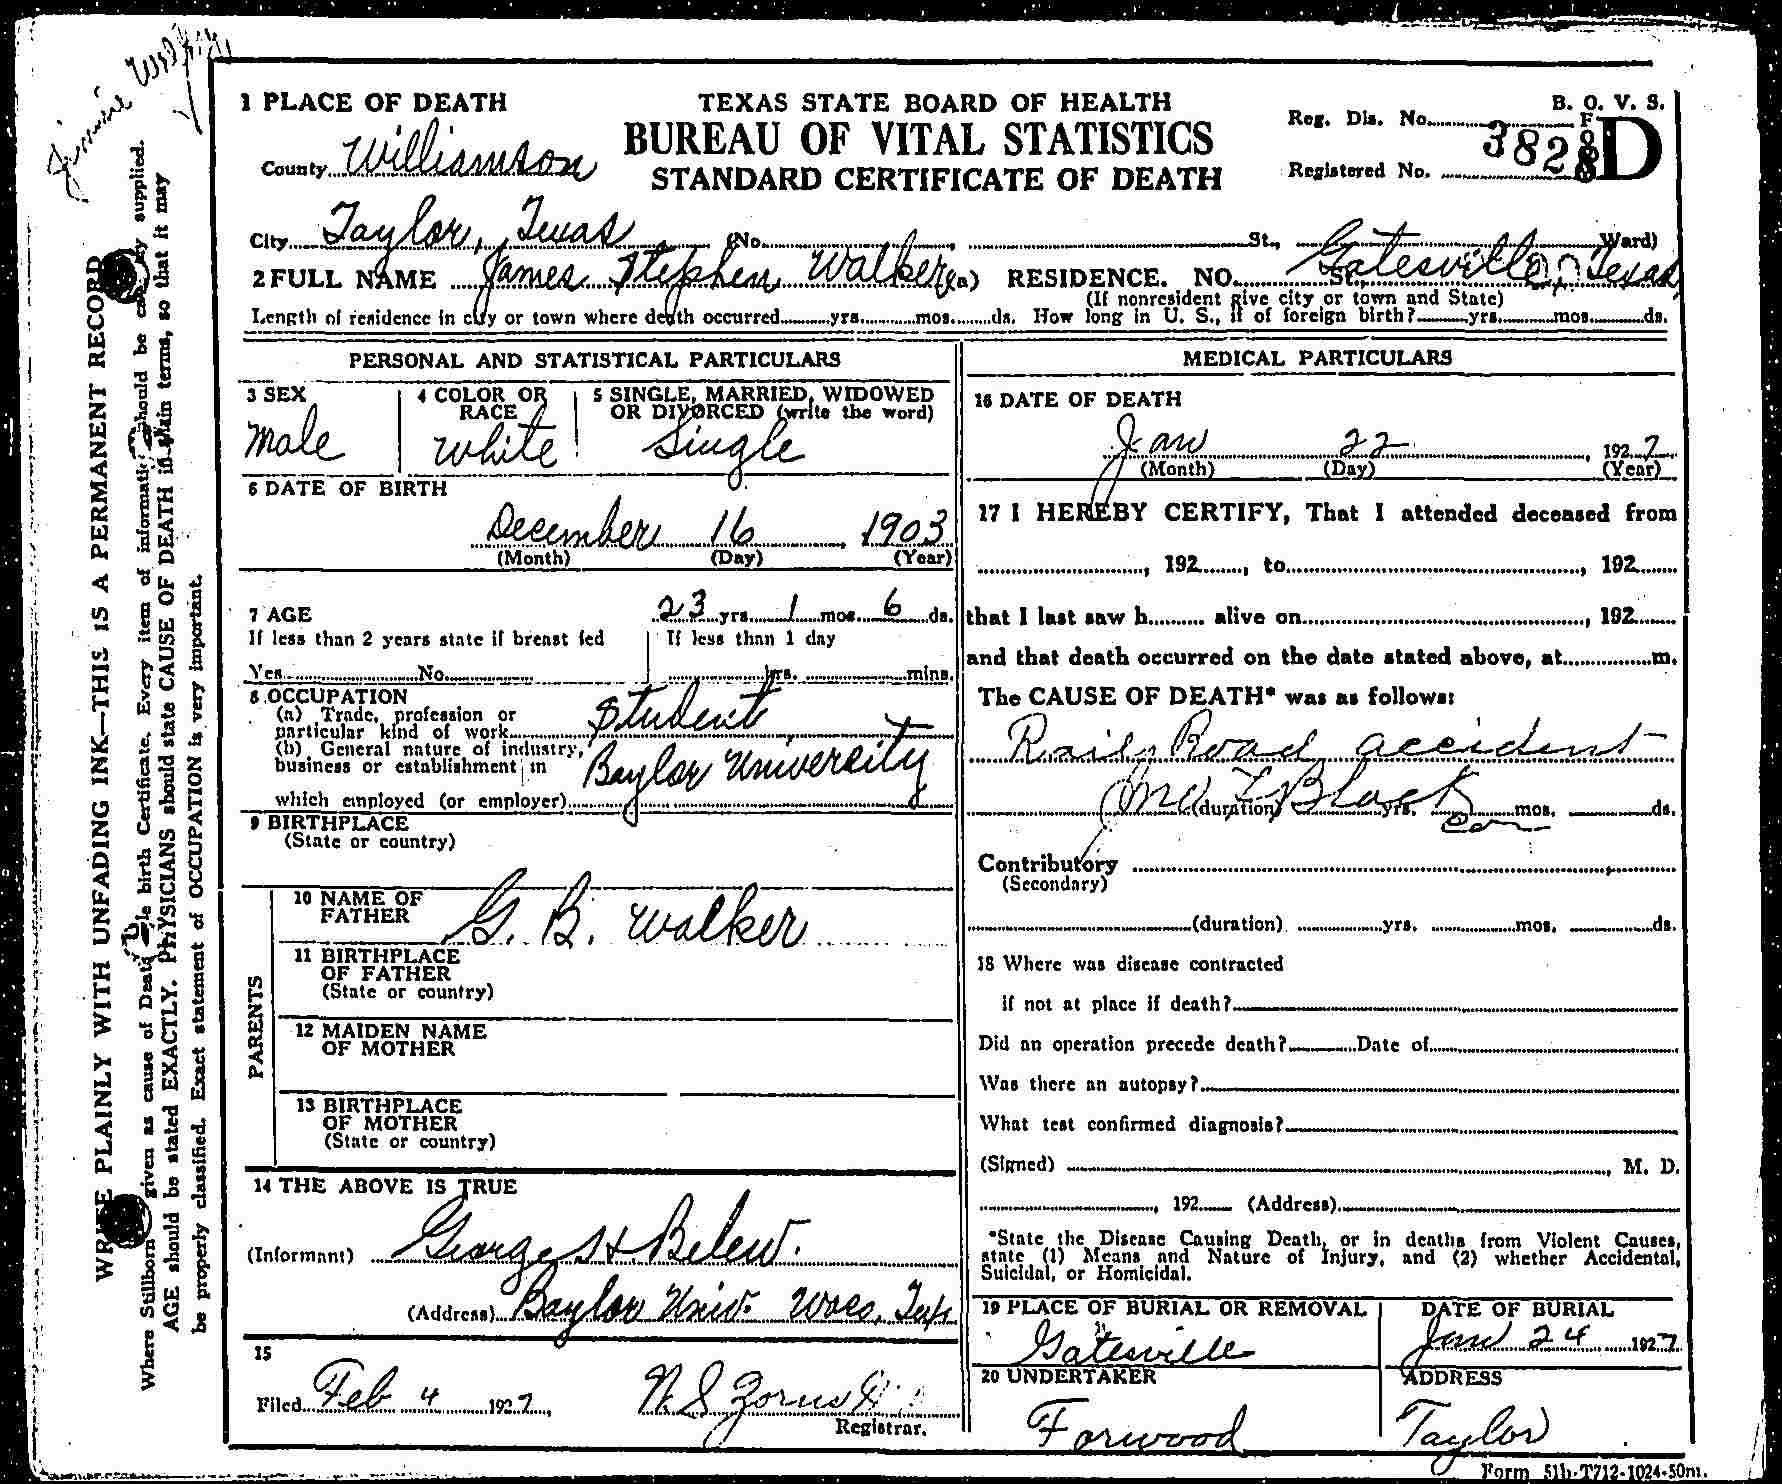 James S. Walker, death certificate, 1927, Williamson County, Texas. Died in bus accident with Baylor basketball team.